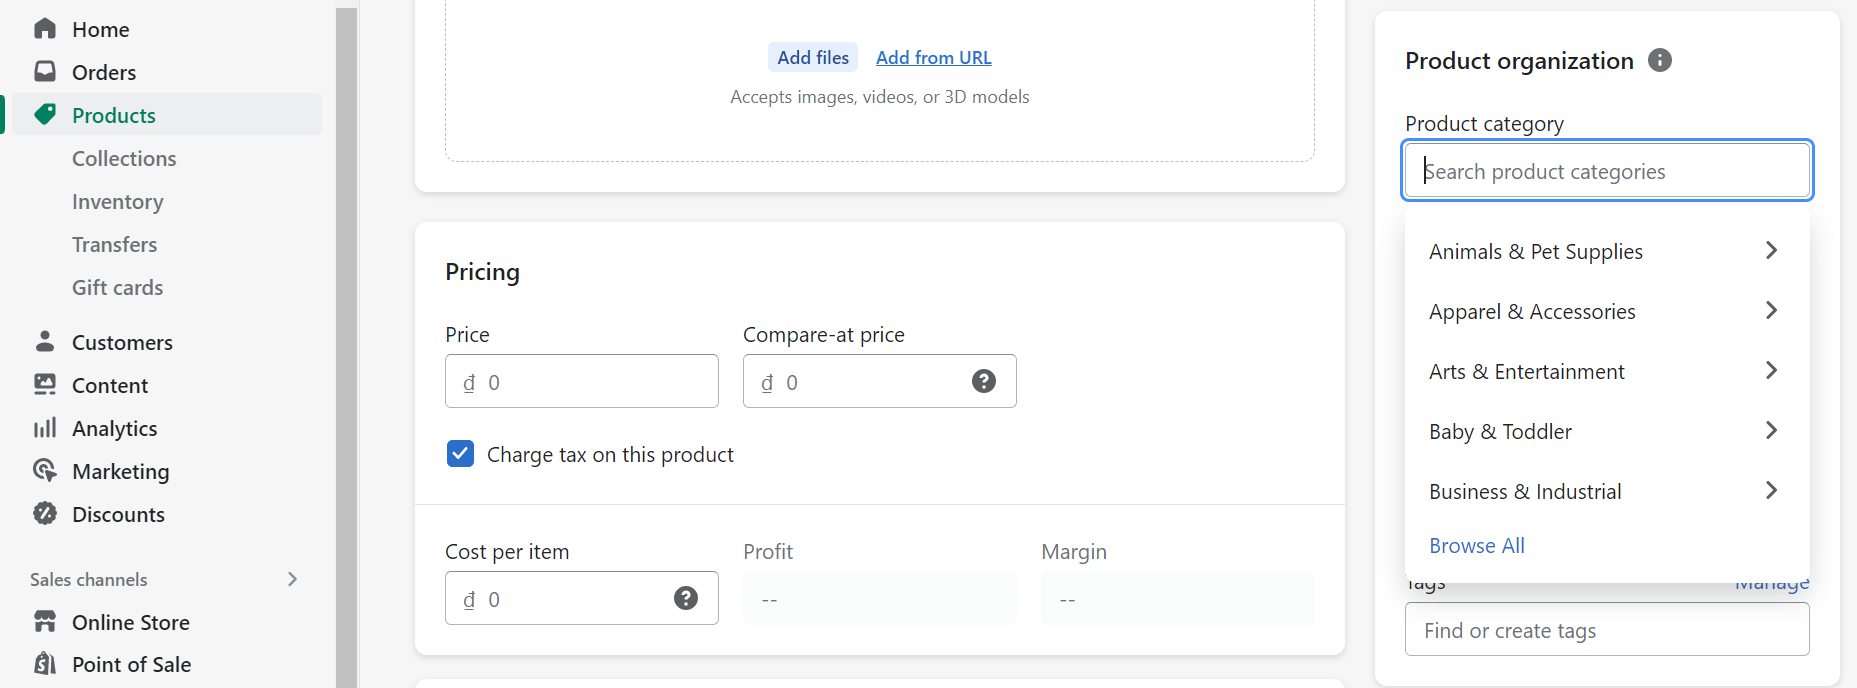 Adding product categories in Shopify when adding new products - Pick the right category